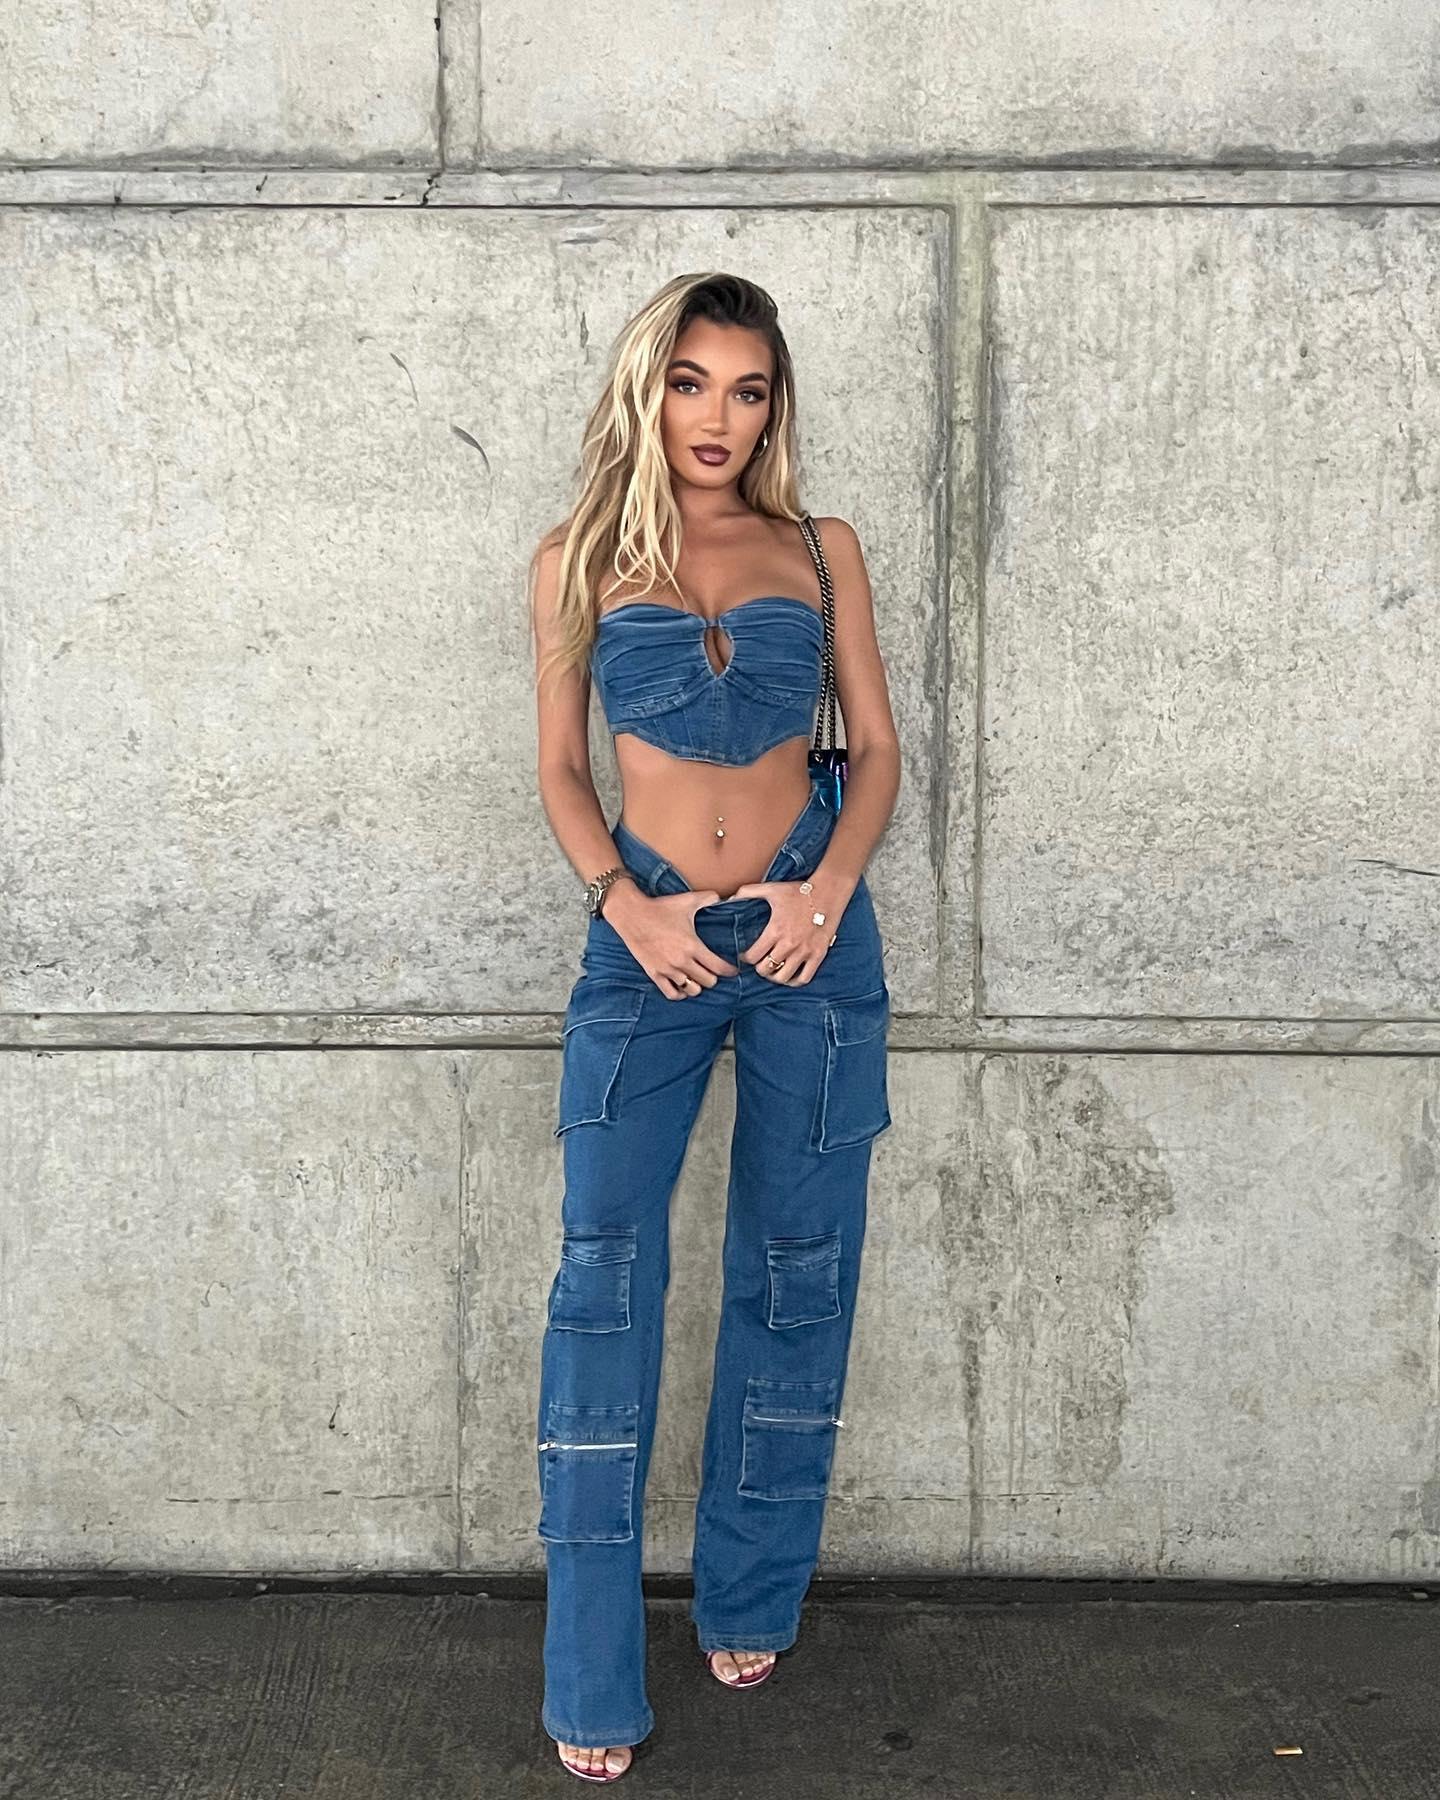 Beaux Raymond poses in a strapless denim crop top